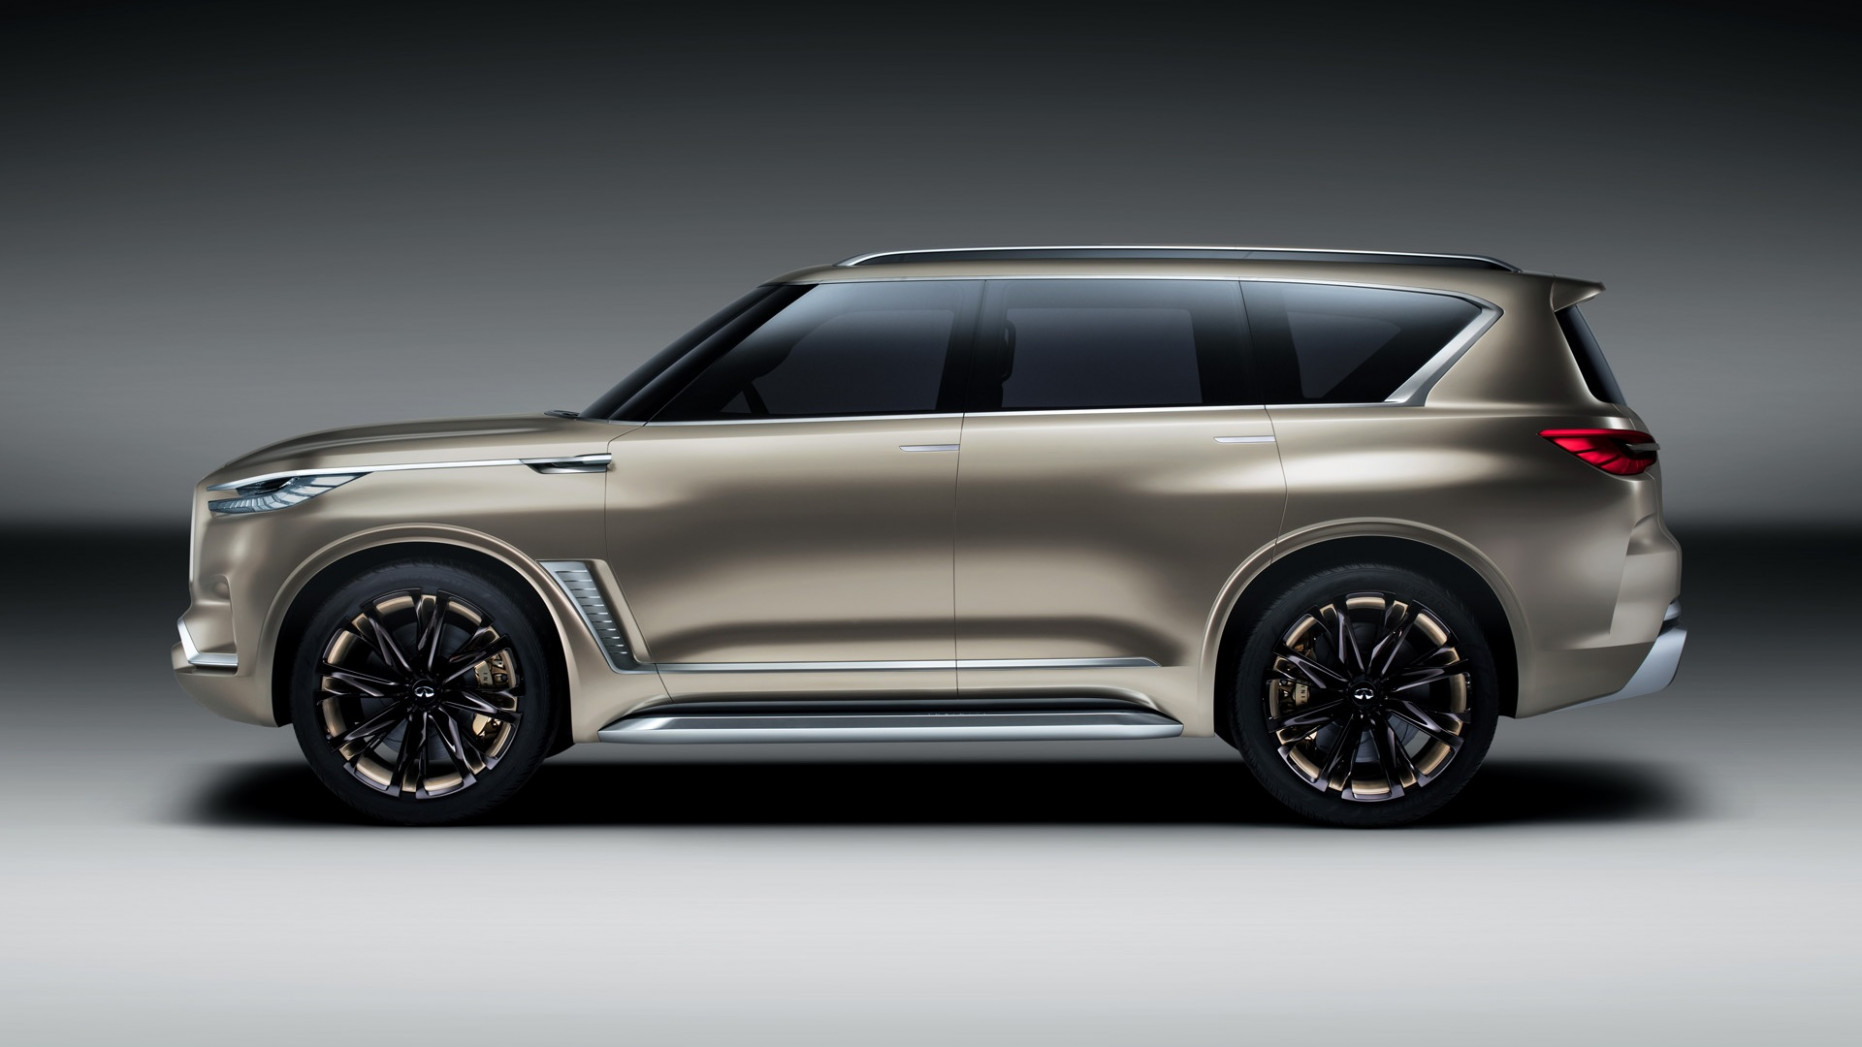 Reviews When Does The 2023 Infiniti Qx80 Come Out